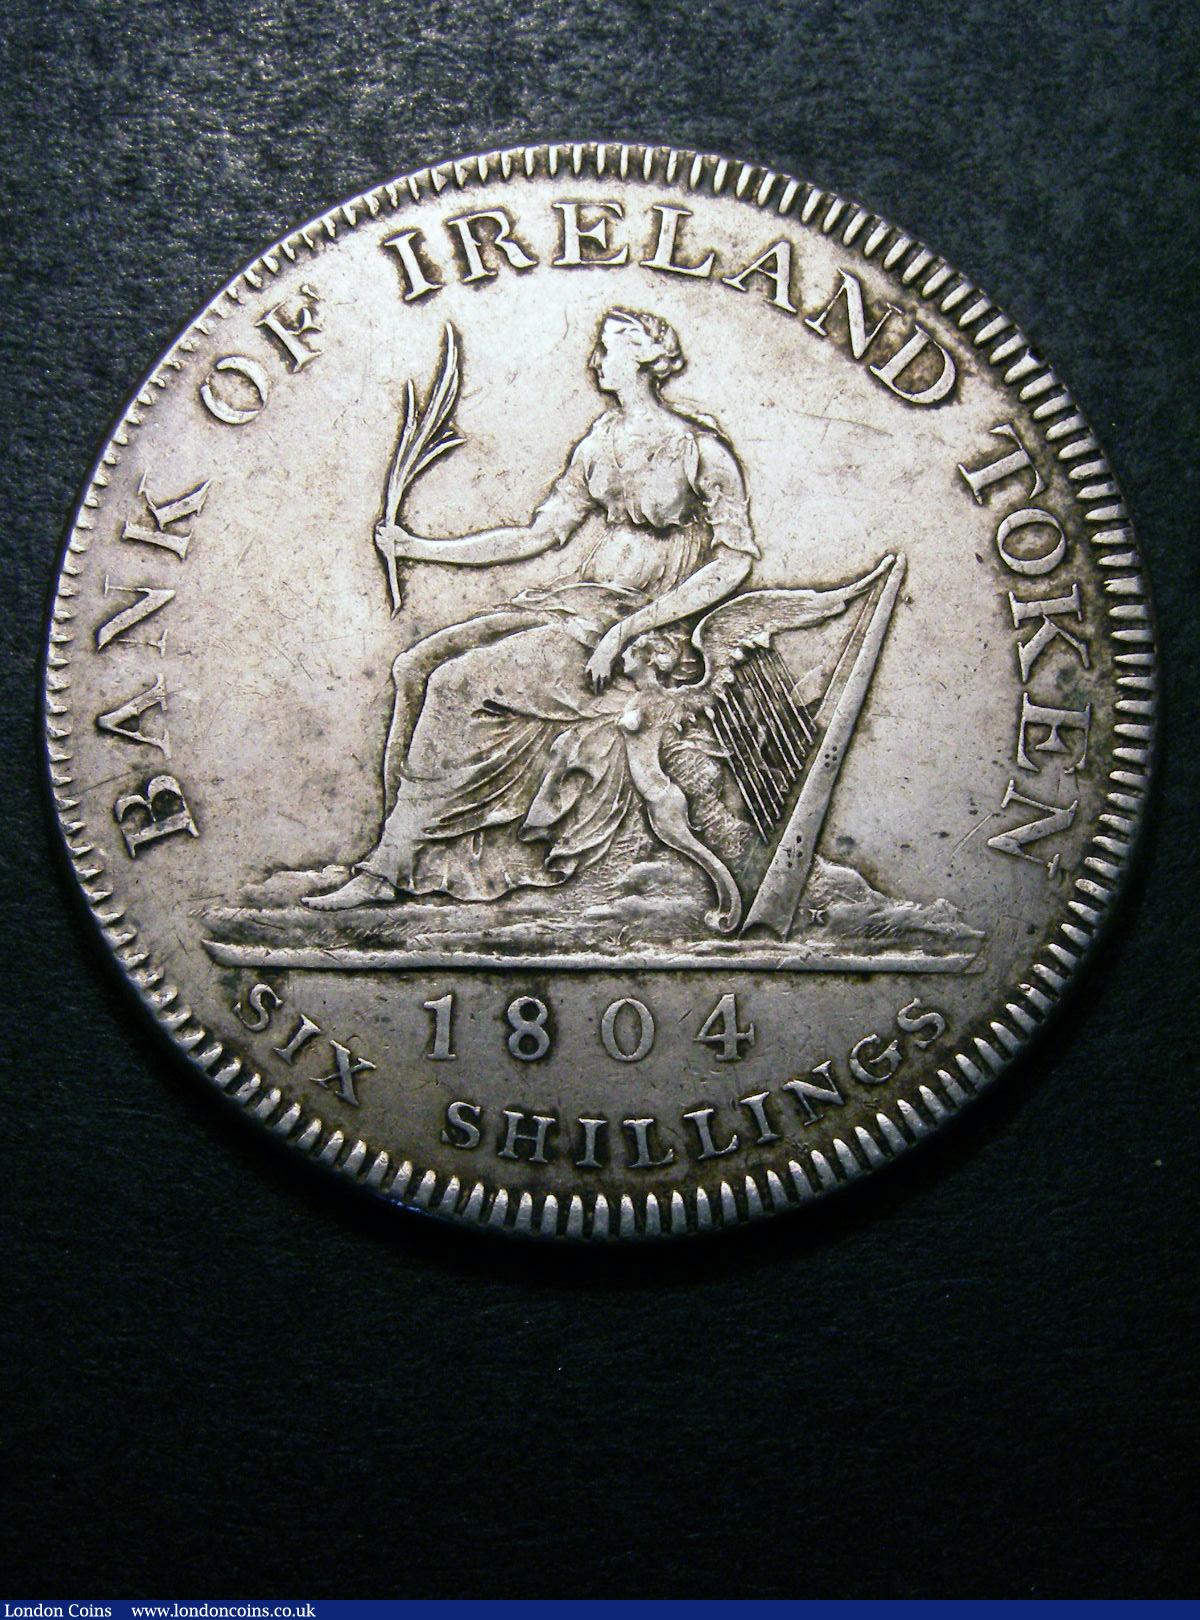 Ireland Six Shillings Bank Token 1804 S.6615 Good Fine/Fine with some digs in the obverse fields  : World Coins : Auction 133 : Lot 1388